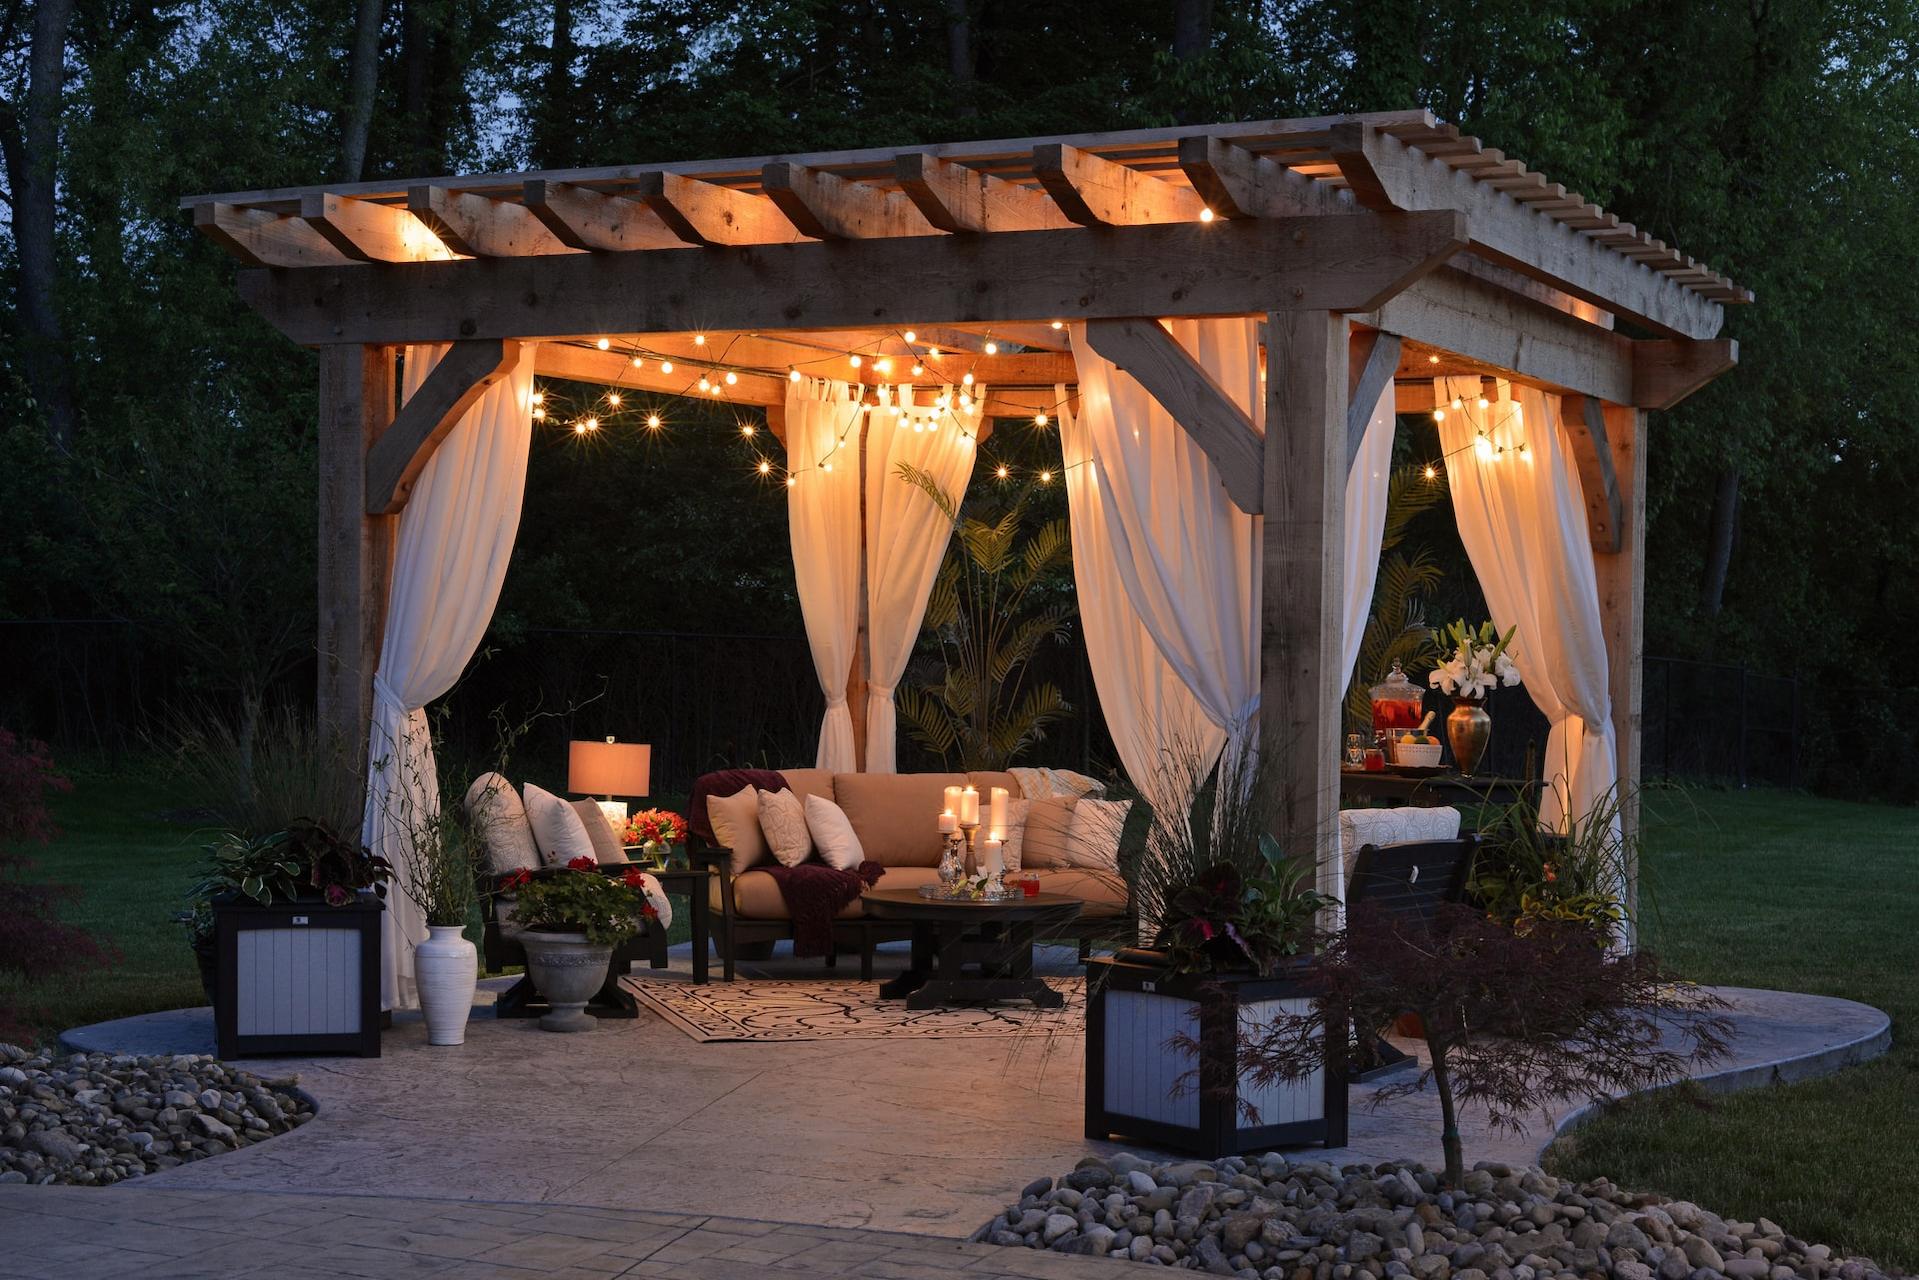 What Are Some Of The Wonderful Ways To Use Your Bespoke Pergolas?